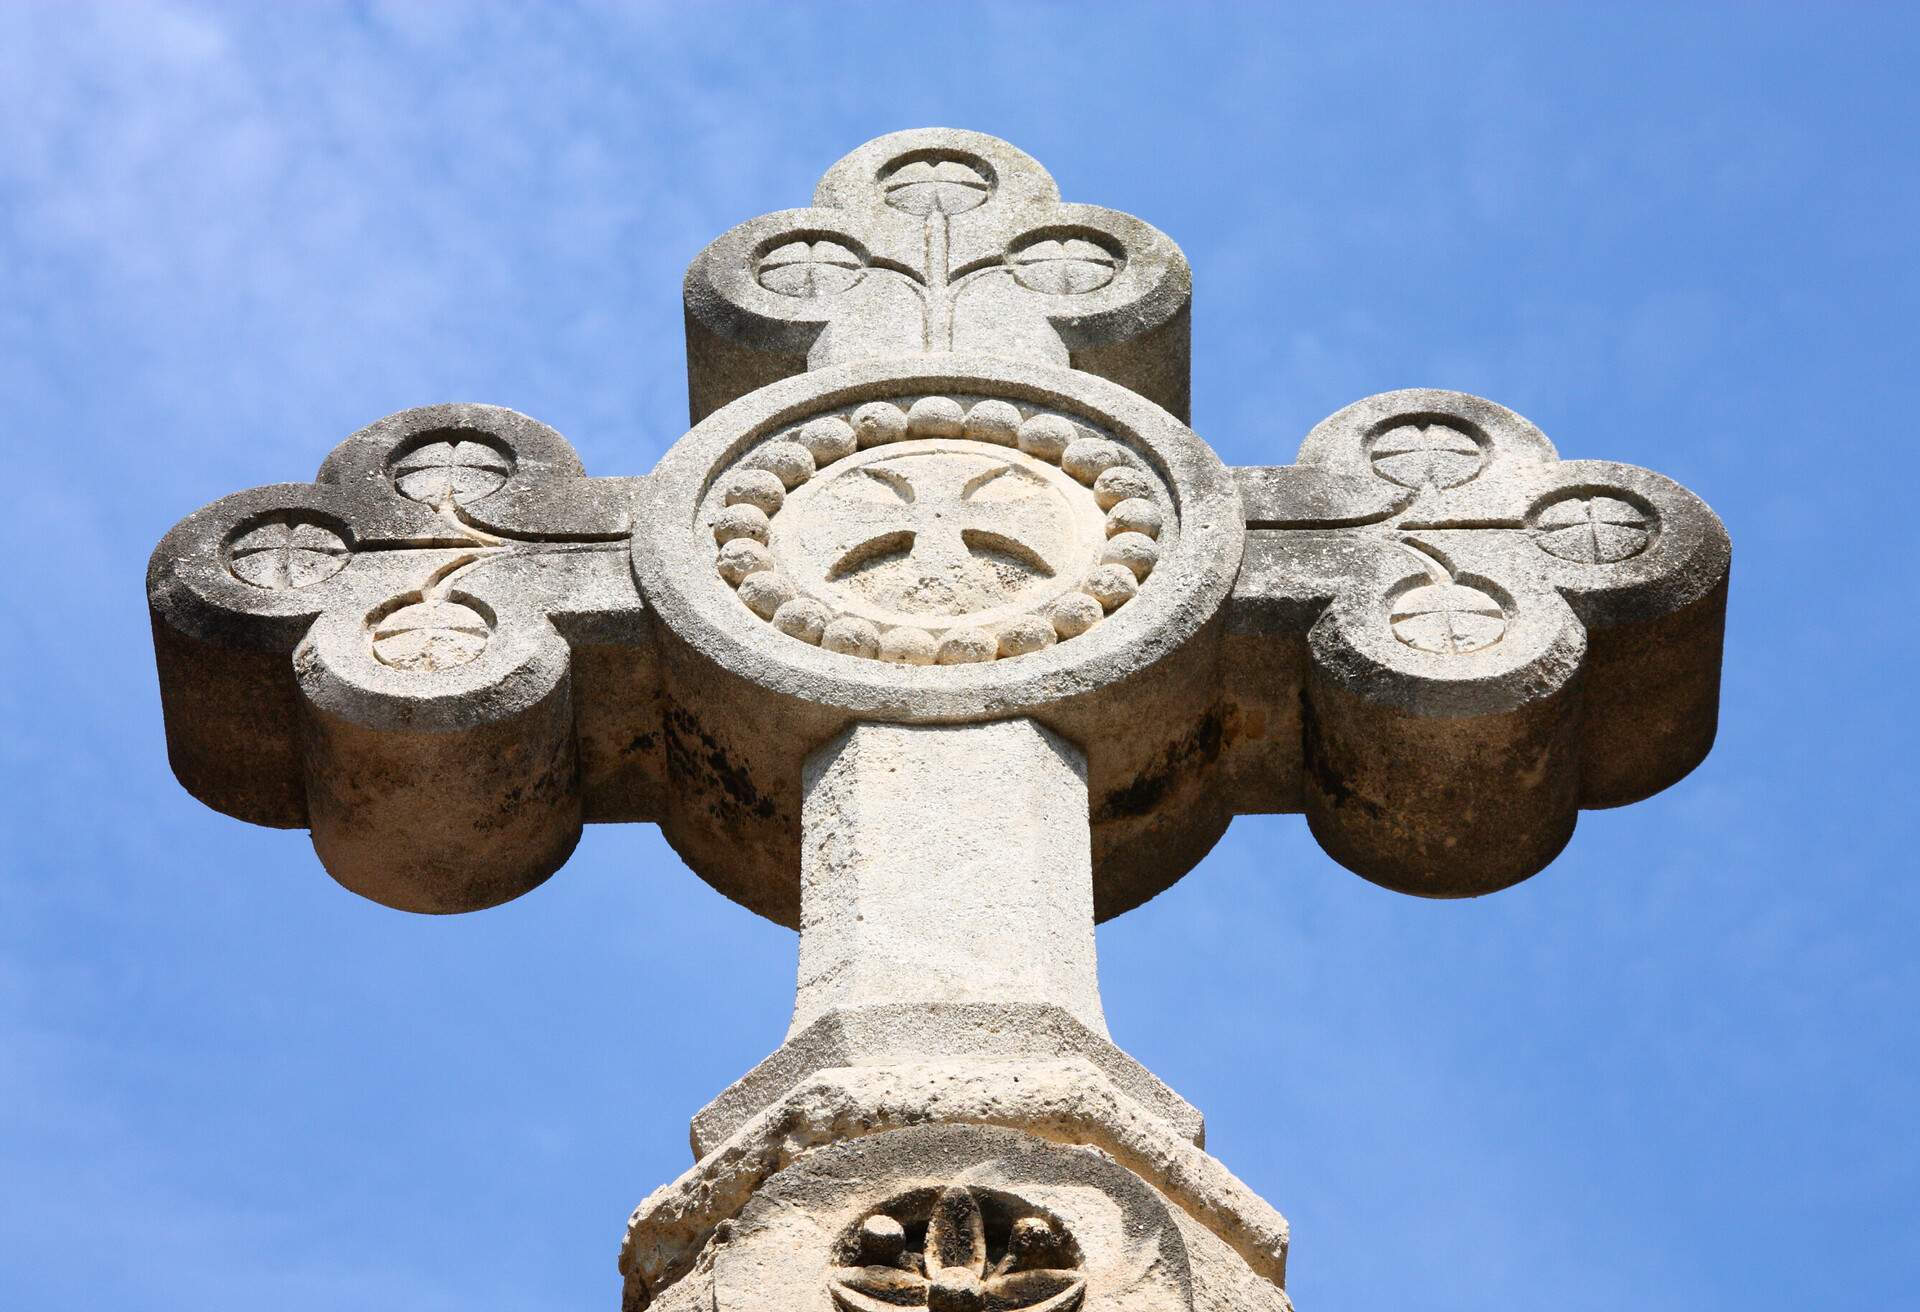 Cross made of stone with clover-shaped edges and a centre with circular carvings.